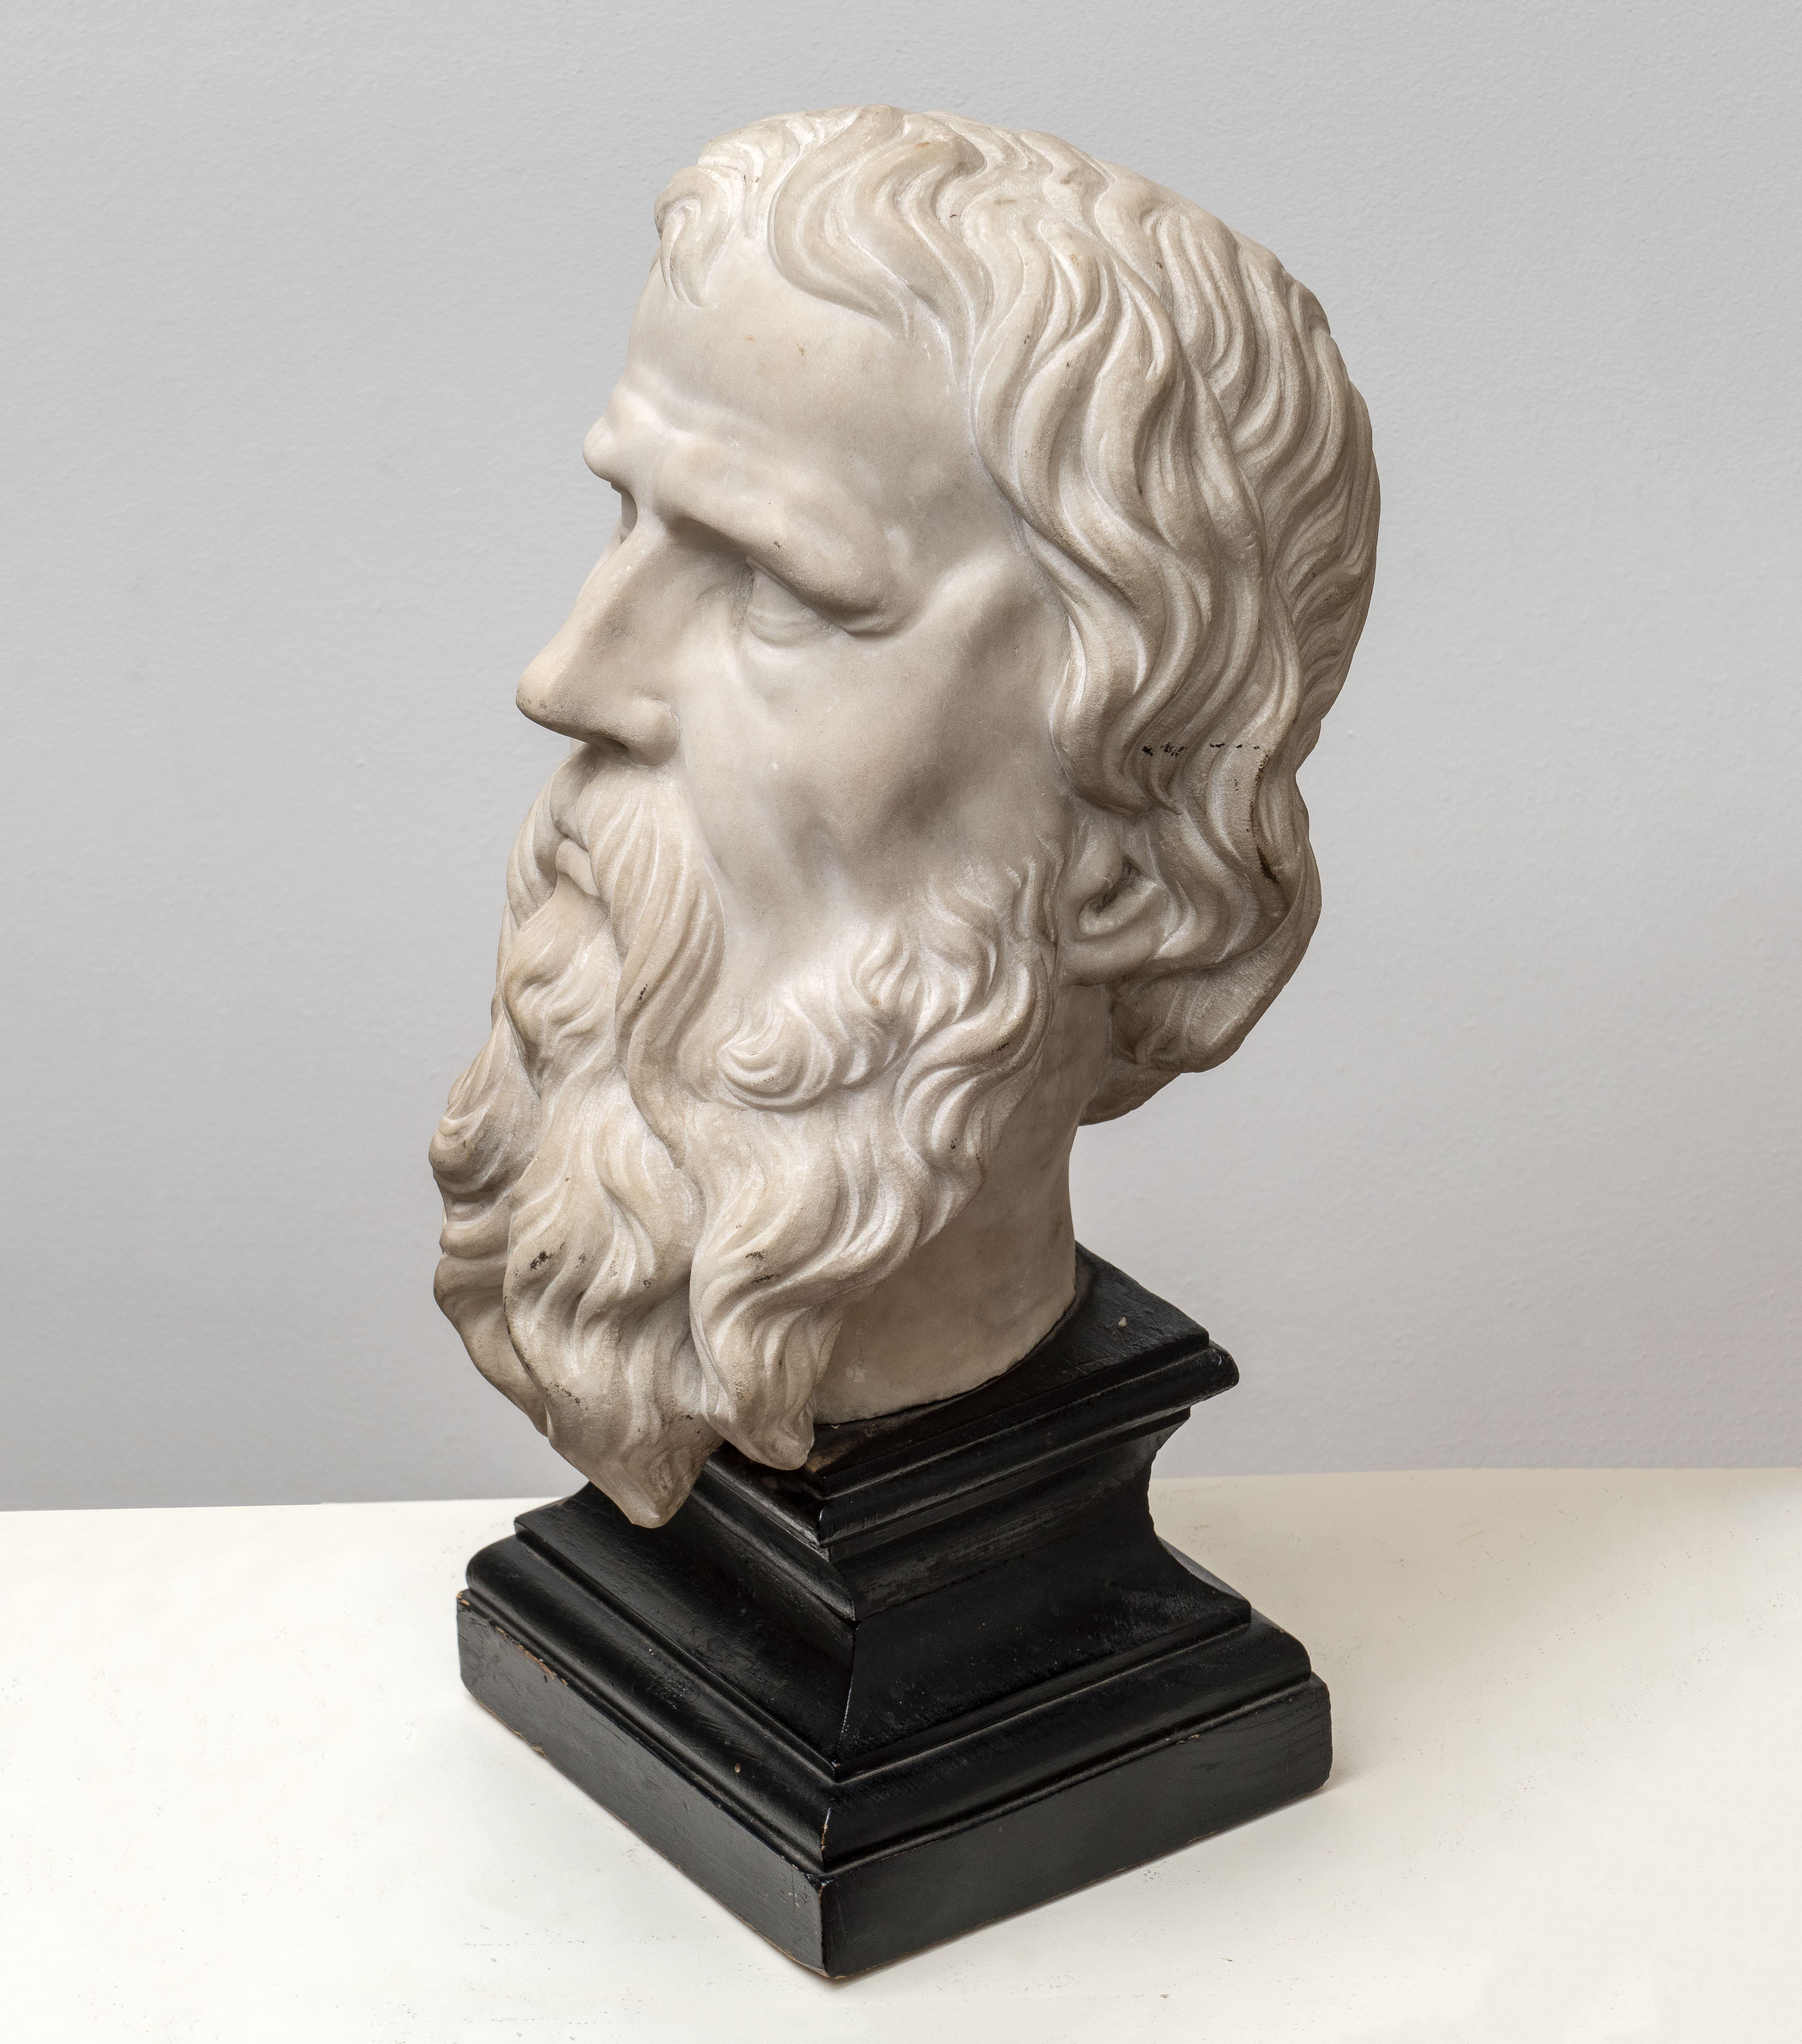 ITALIAN MARBLE HEAD OF A PHILOSOPHER
Italy, Late 17th/early 18th Century
Marble
height 36 cm (14 1/4 in)
height 51 cm (20 in) with base